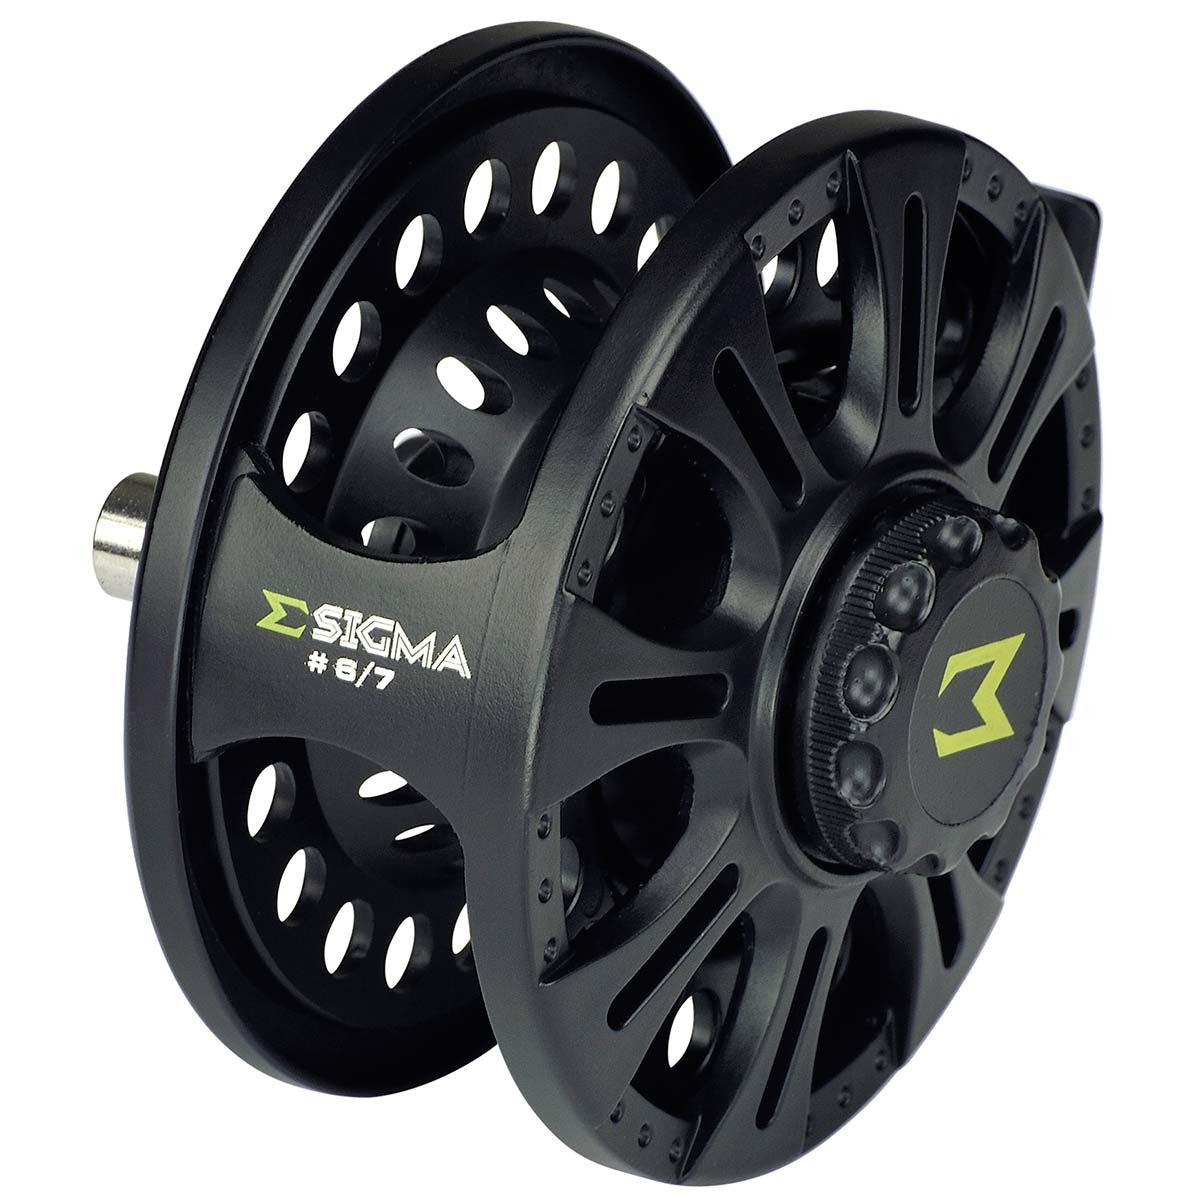 Shakespeare Sigma Fly Rod & Reel Combos – Anglers World